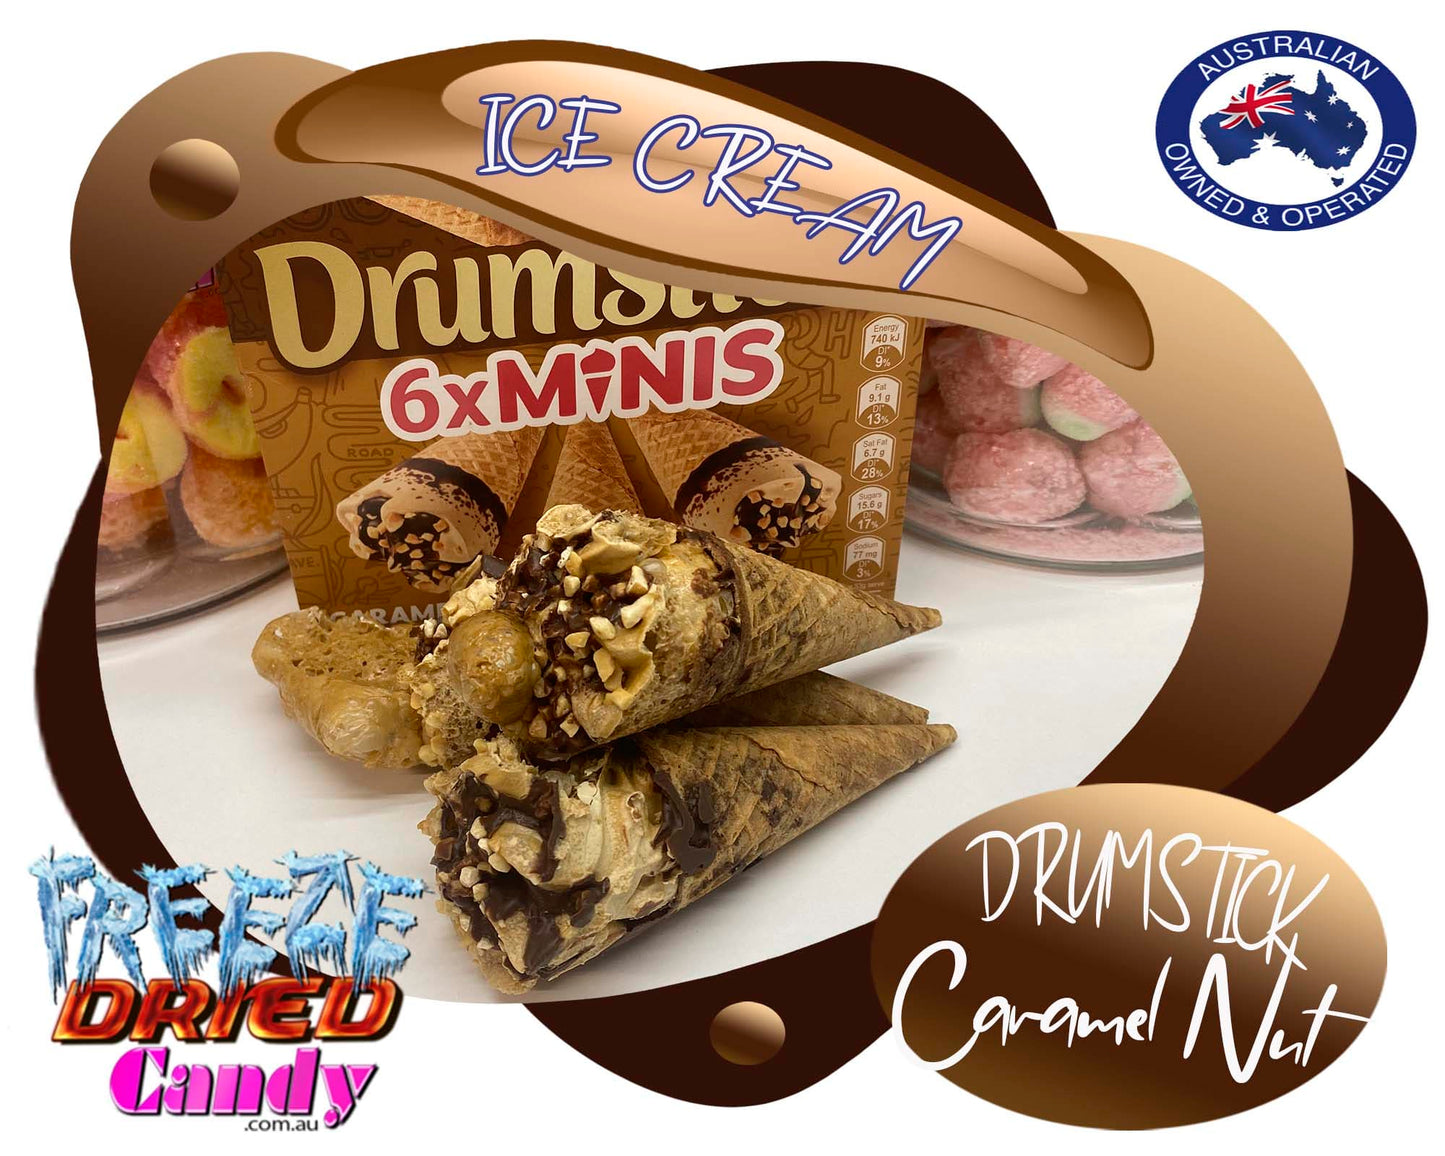  Freeze Dried  Ice Cream Drumstick Mini  - Caramel Nut - Peters  Drumstick Mini's Caramel Nut is a delicious crispy wafer cone with filled with Caramel Flavored ice cream topped with caramel syrup and nuts.  Its ready-to-eat, crispy, light, and extremely tasty.